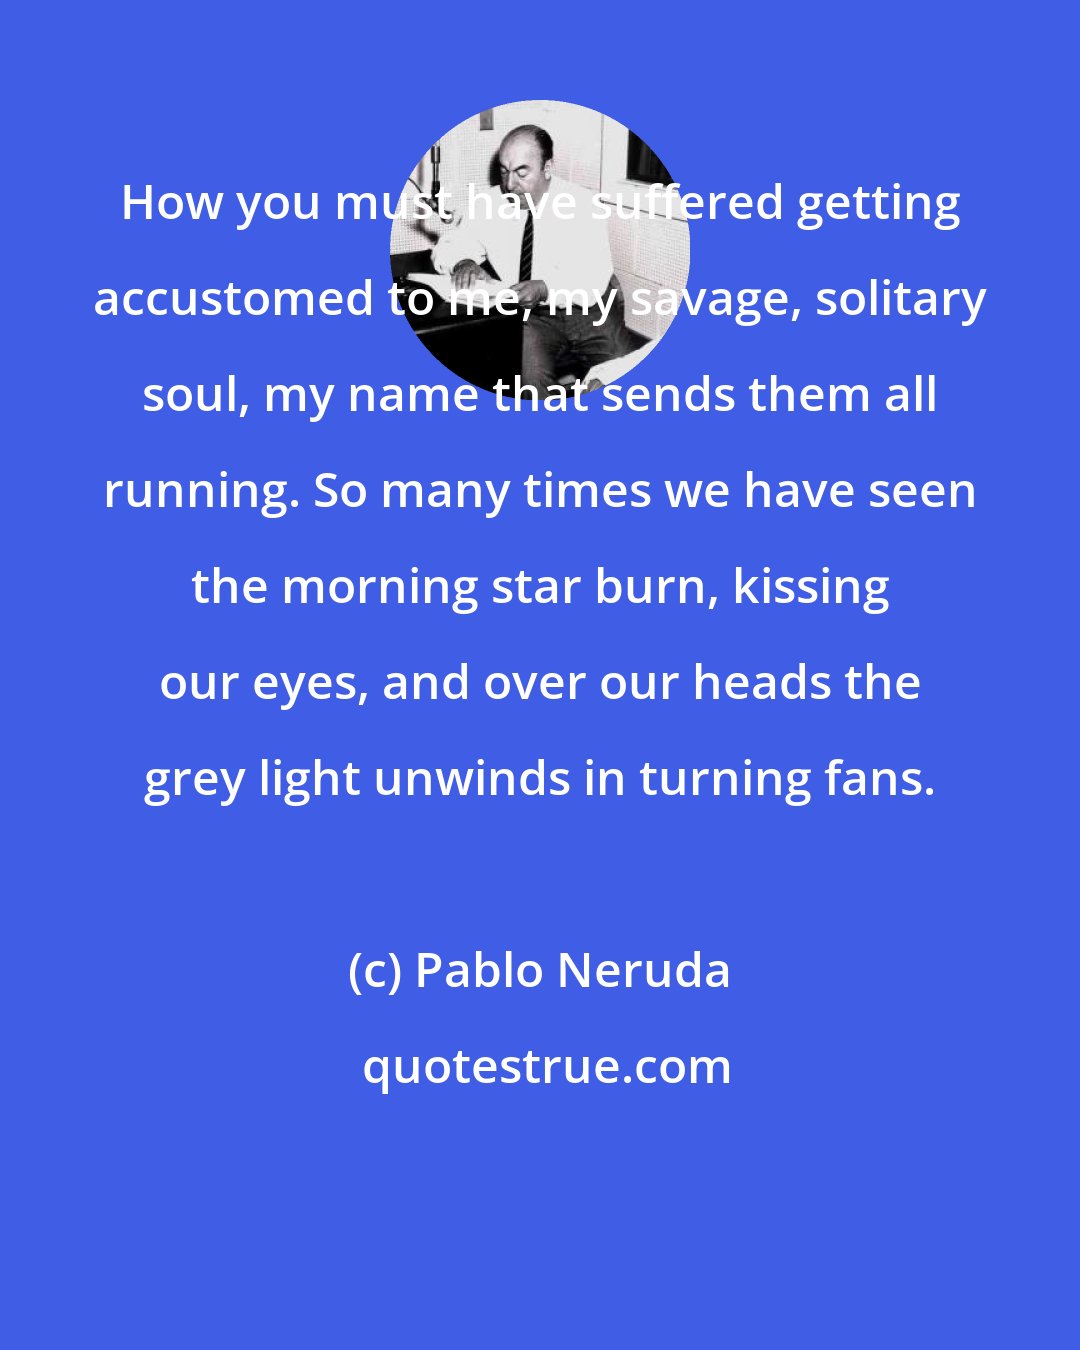 Pablo Neruda: How you must have suffered getting accustomed to me, my savage, solitary soul, my name that sends them all running. So many times we have seen the morning star burn, kissing our eyes, and over our heads the grey light unwinds in turning fans.